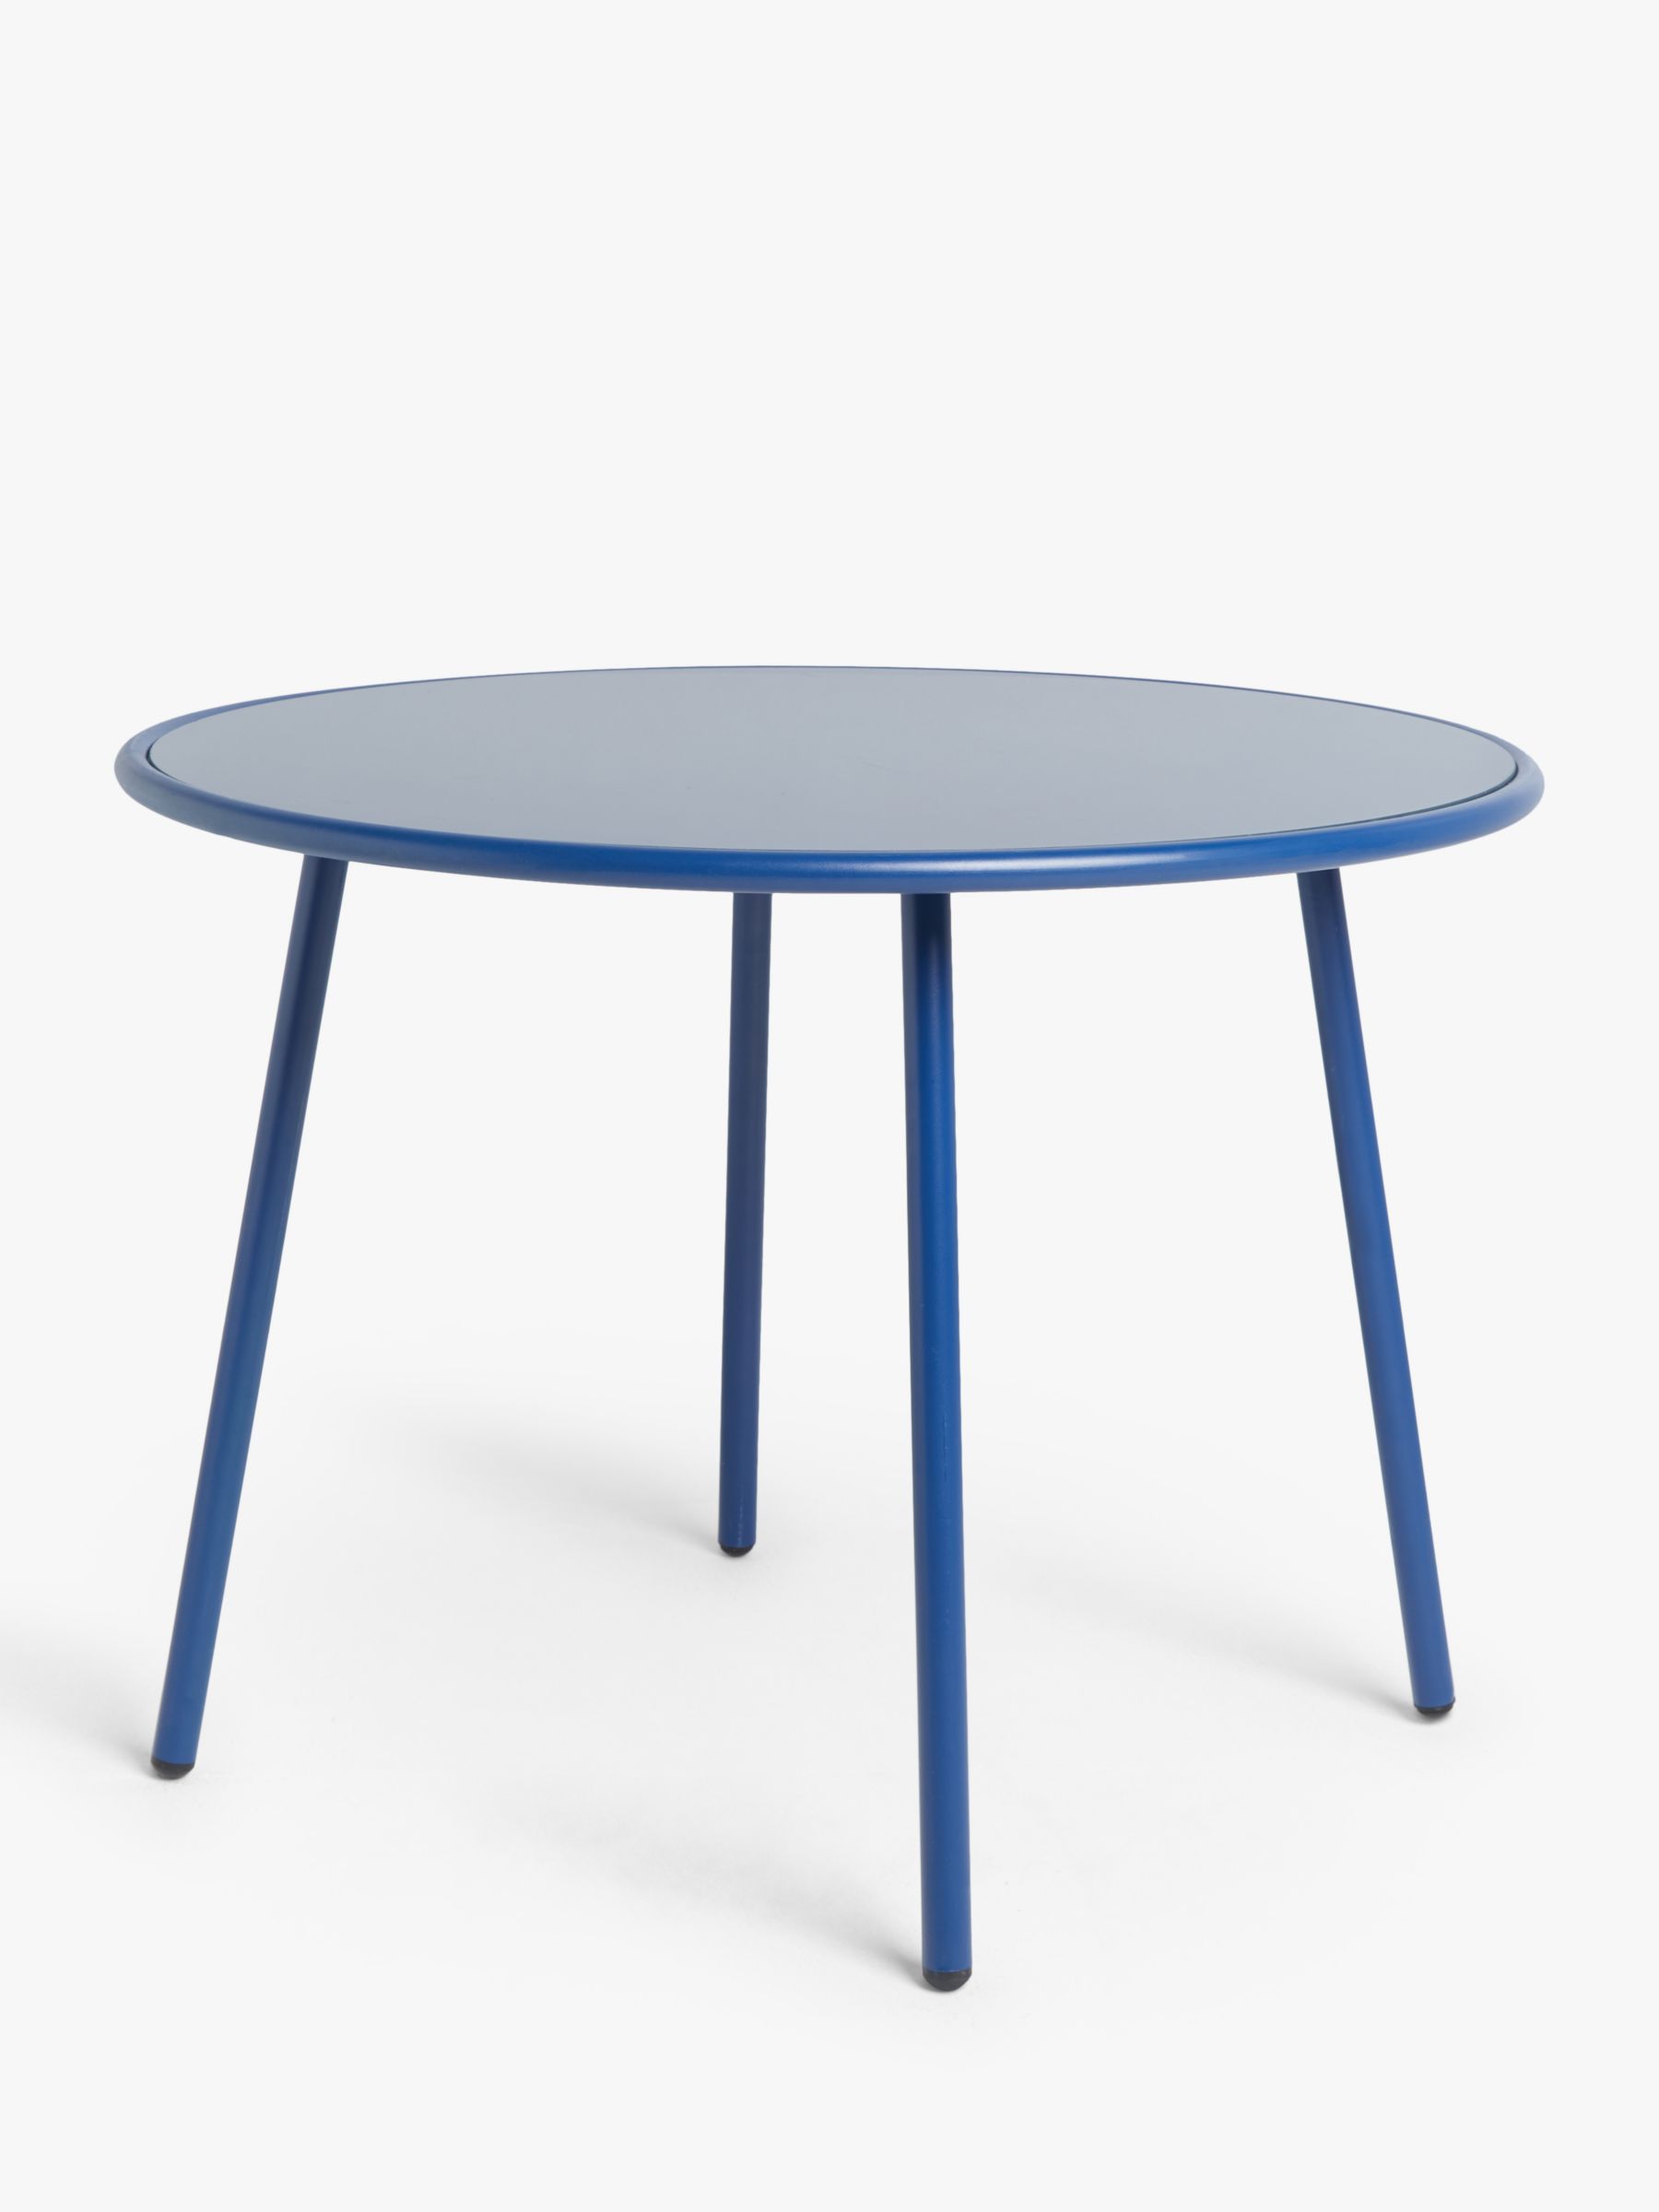 Photo of John lewis anyday brights 4-seater metal round garden dining table 100cm estate blue